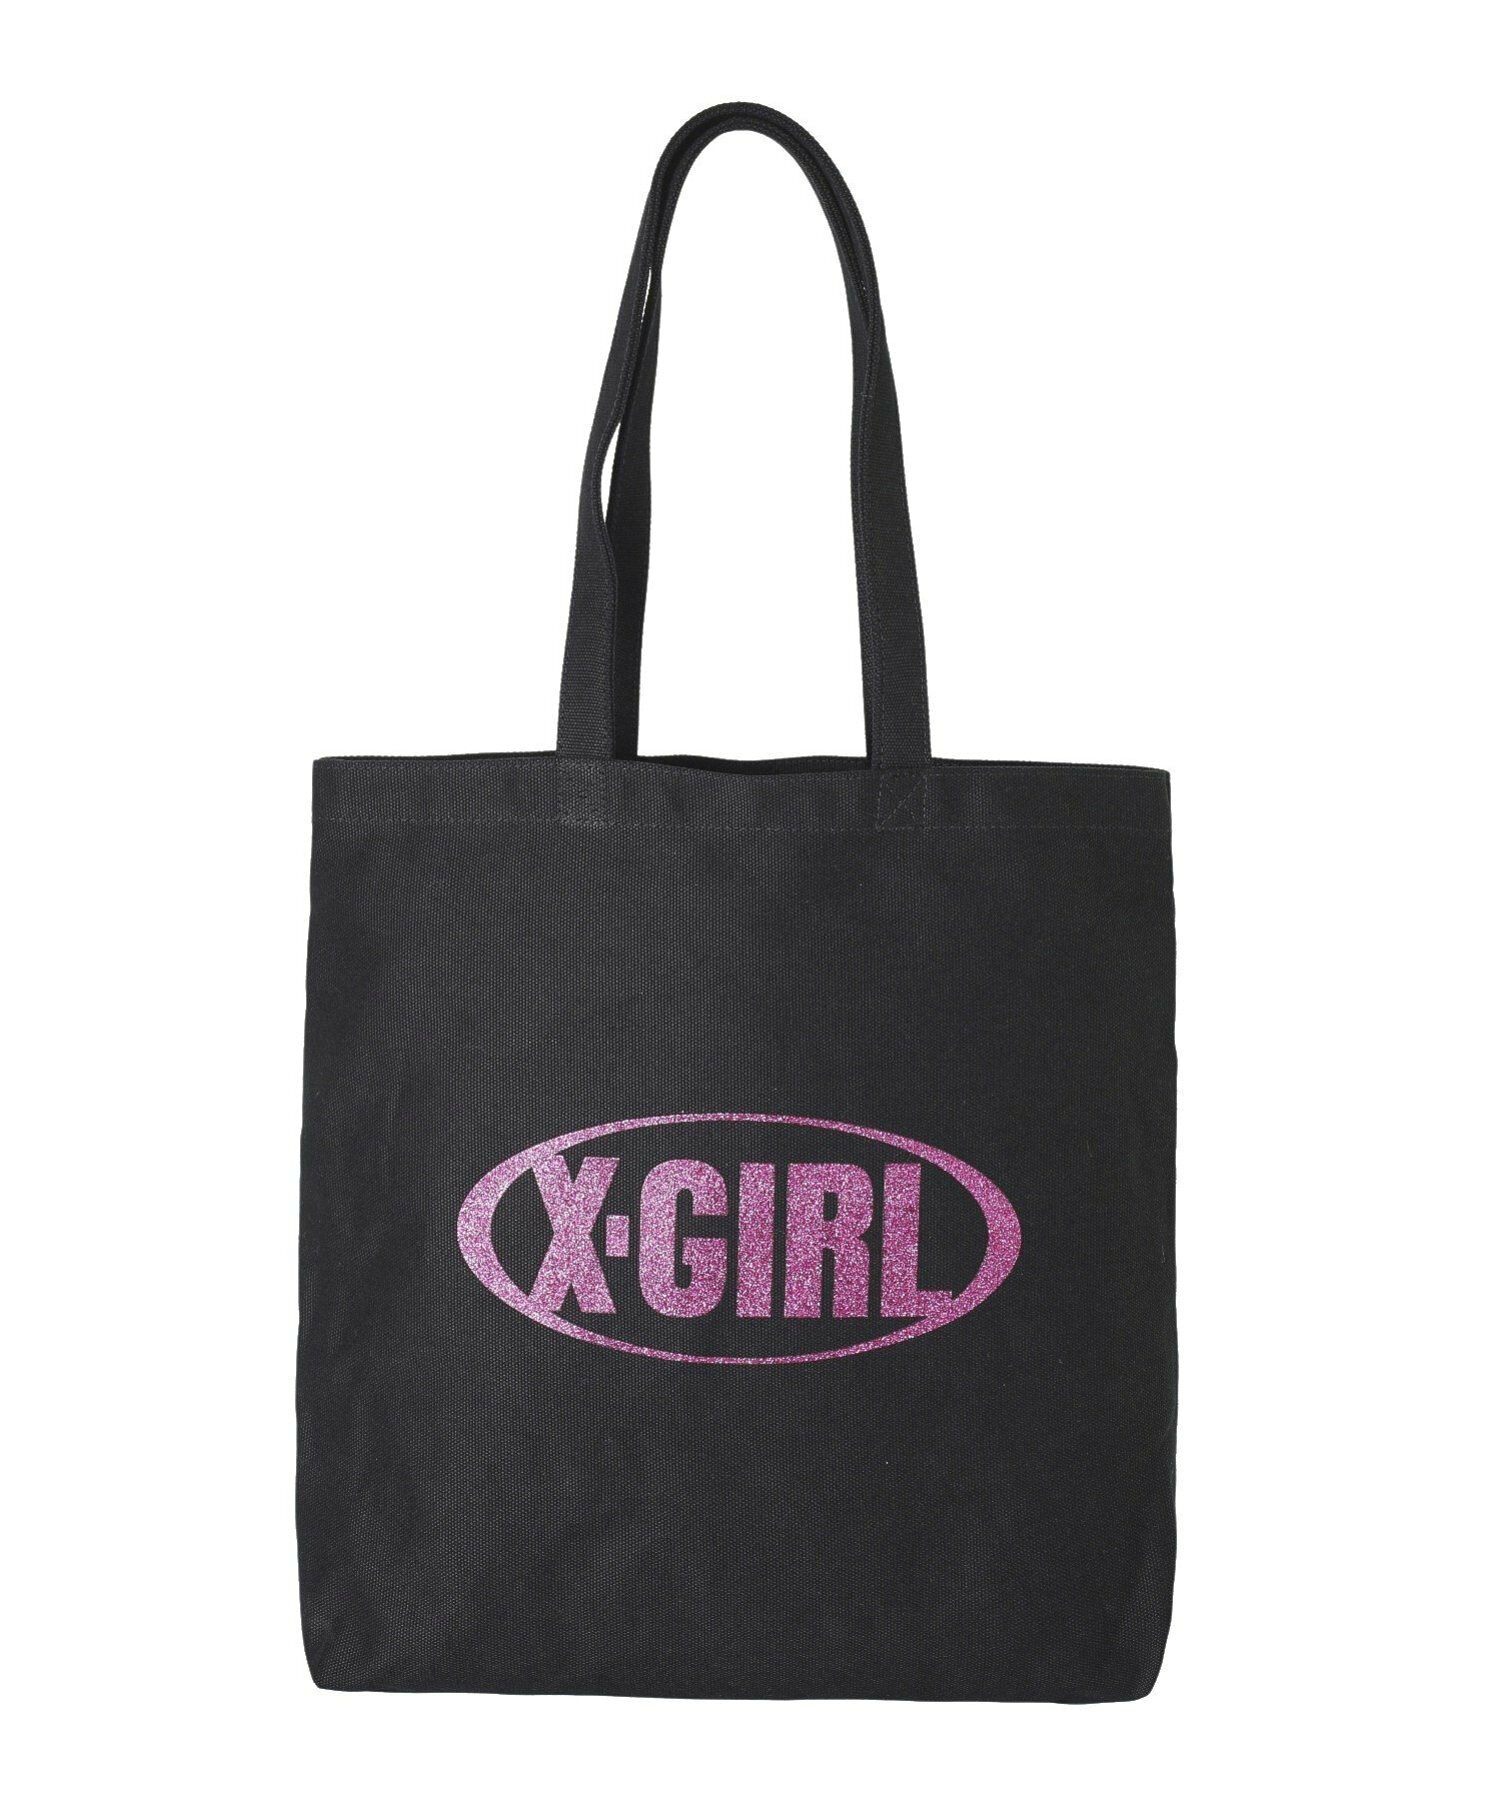 GLITTER OVAL LOGO CANVAS TOTE BAG トートバッグ X-girl